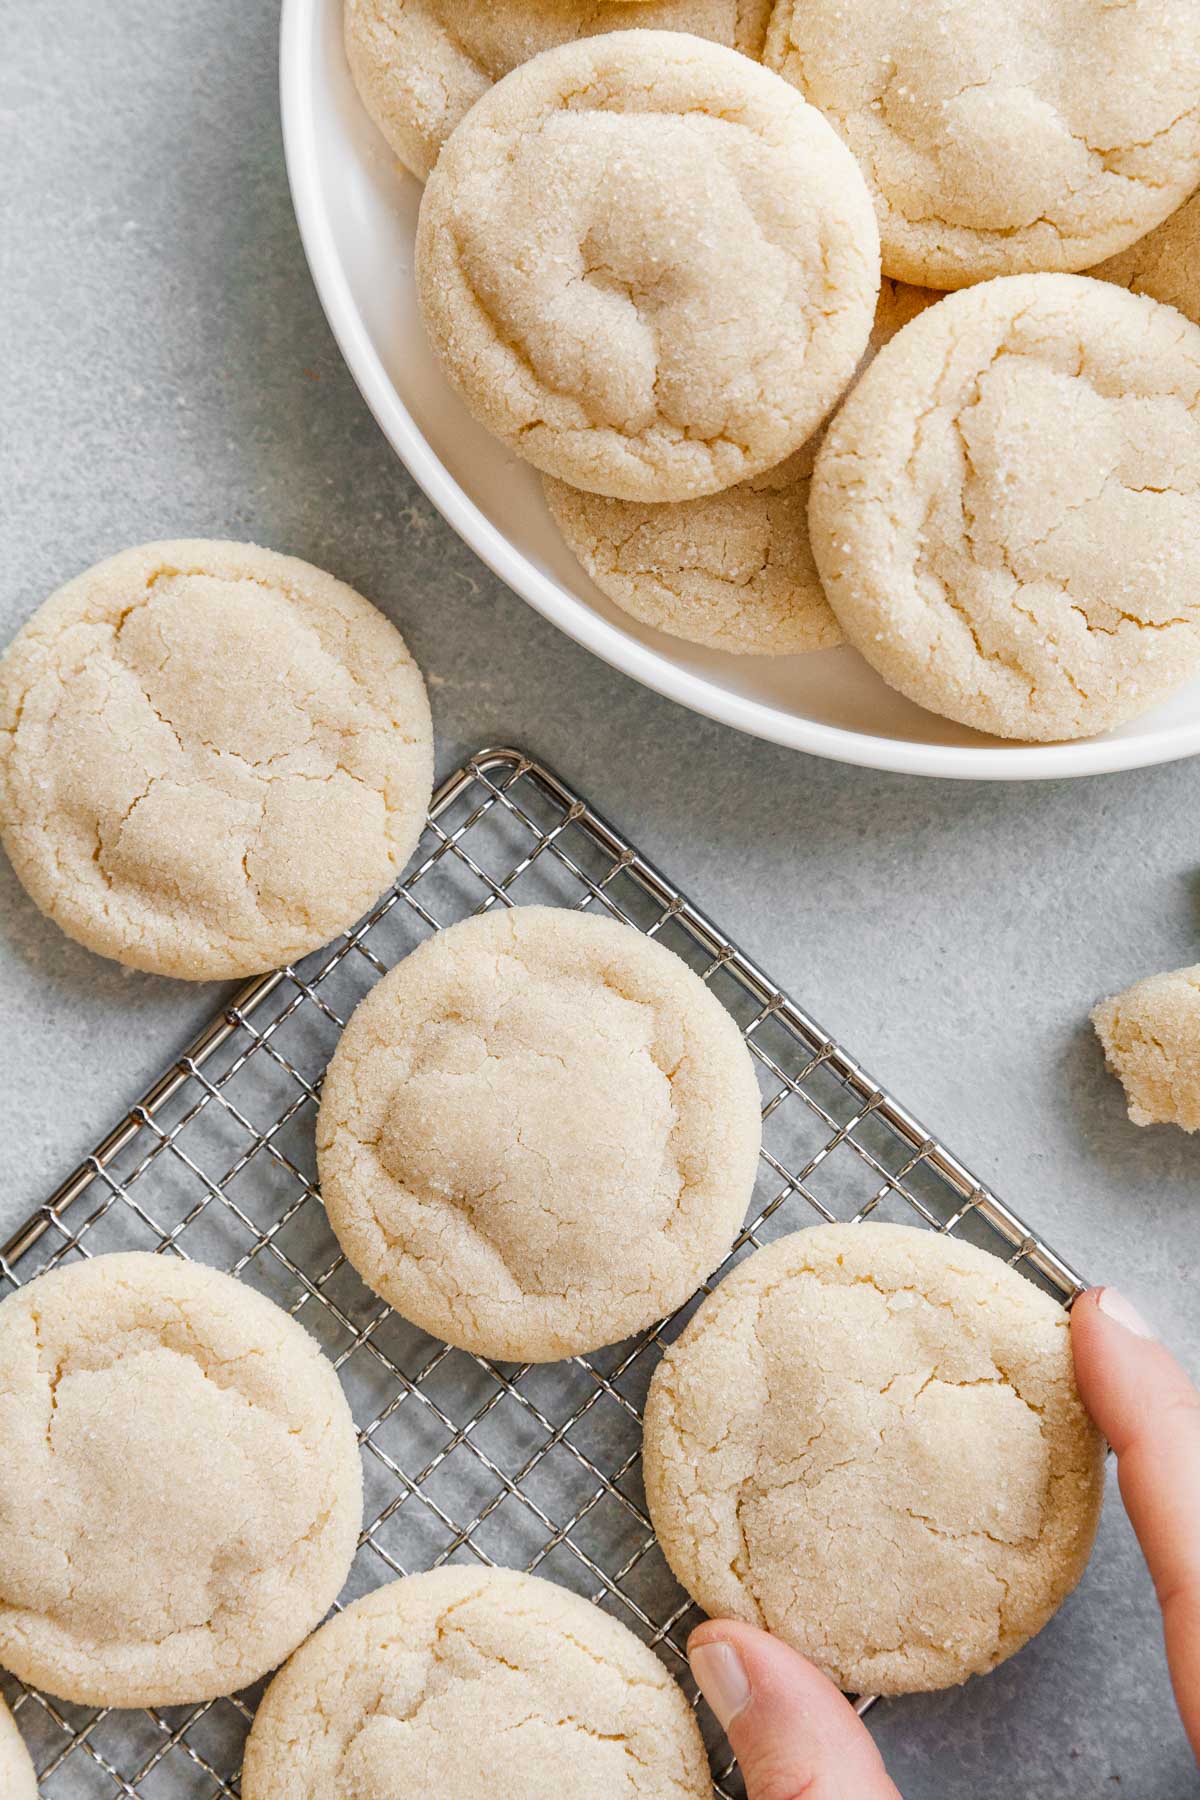 How To Make Sugar Cookies From Scratch